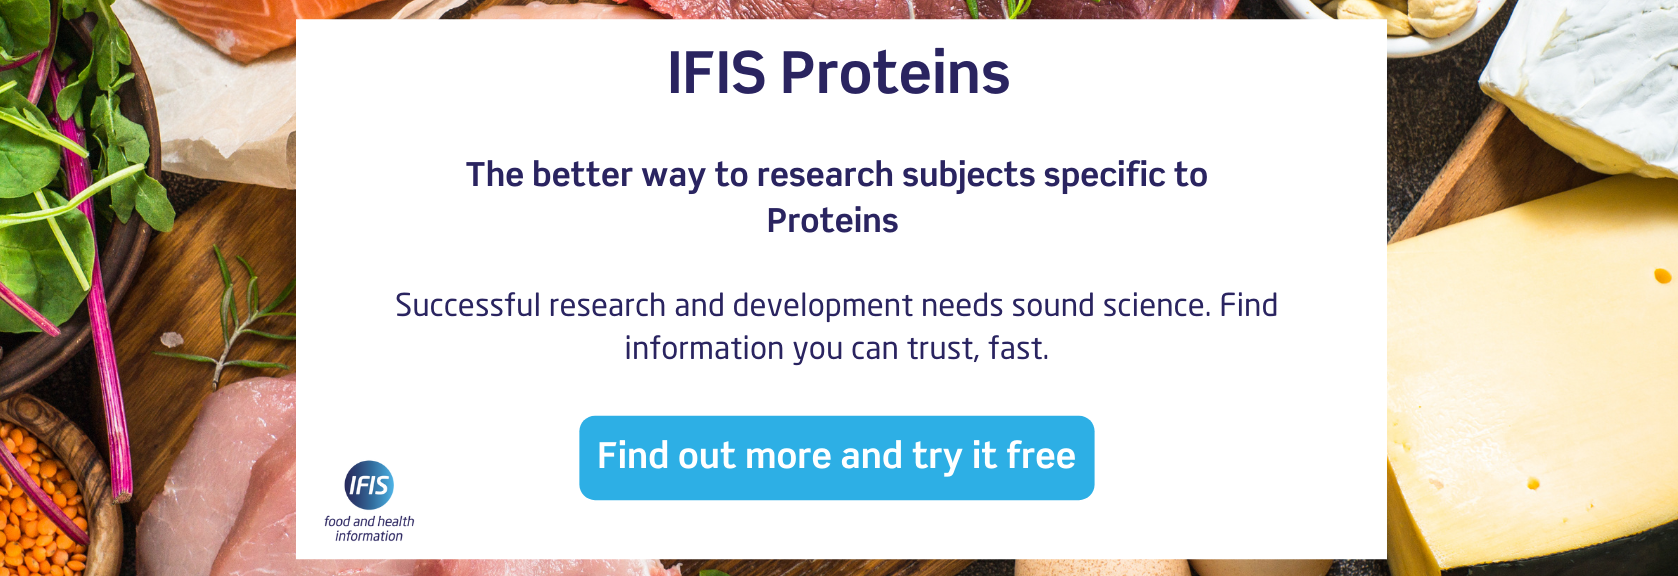 IFIS Proteins CTA